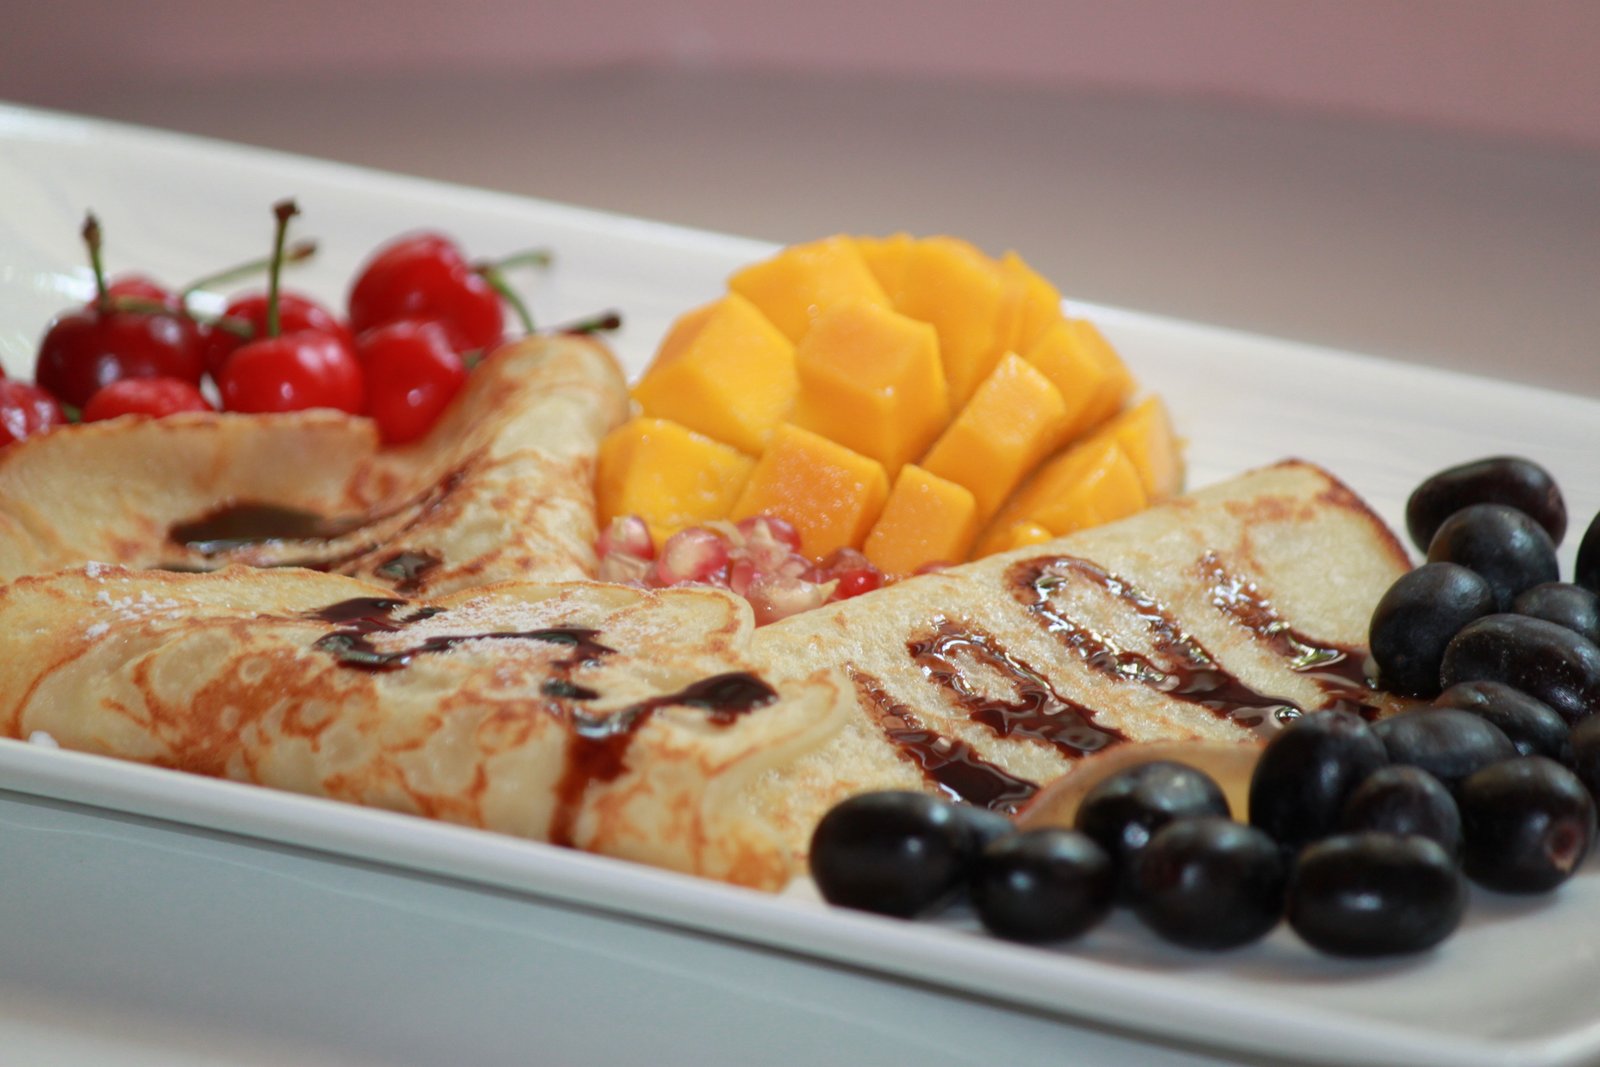 Pancakes Drizzled With Chocolate Sauce Served With Fruits & Jaggery Recipe (Breakfast In Bed)